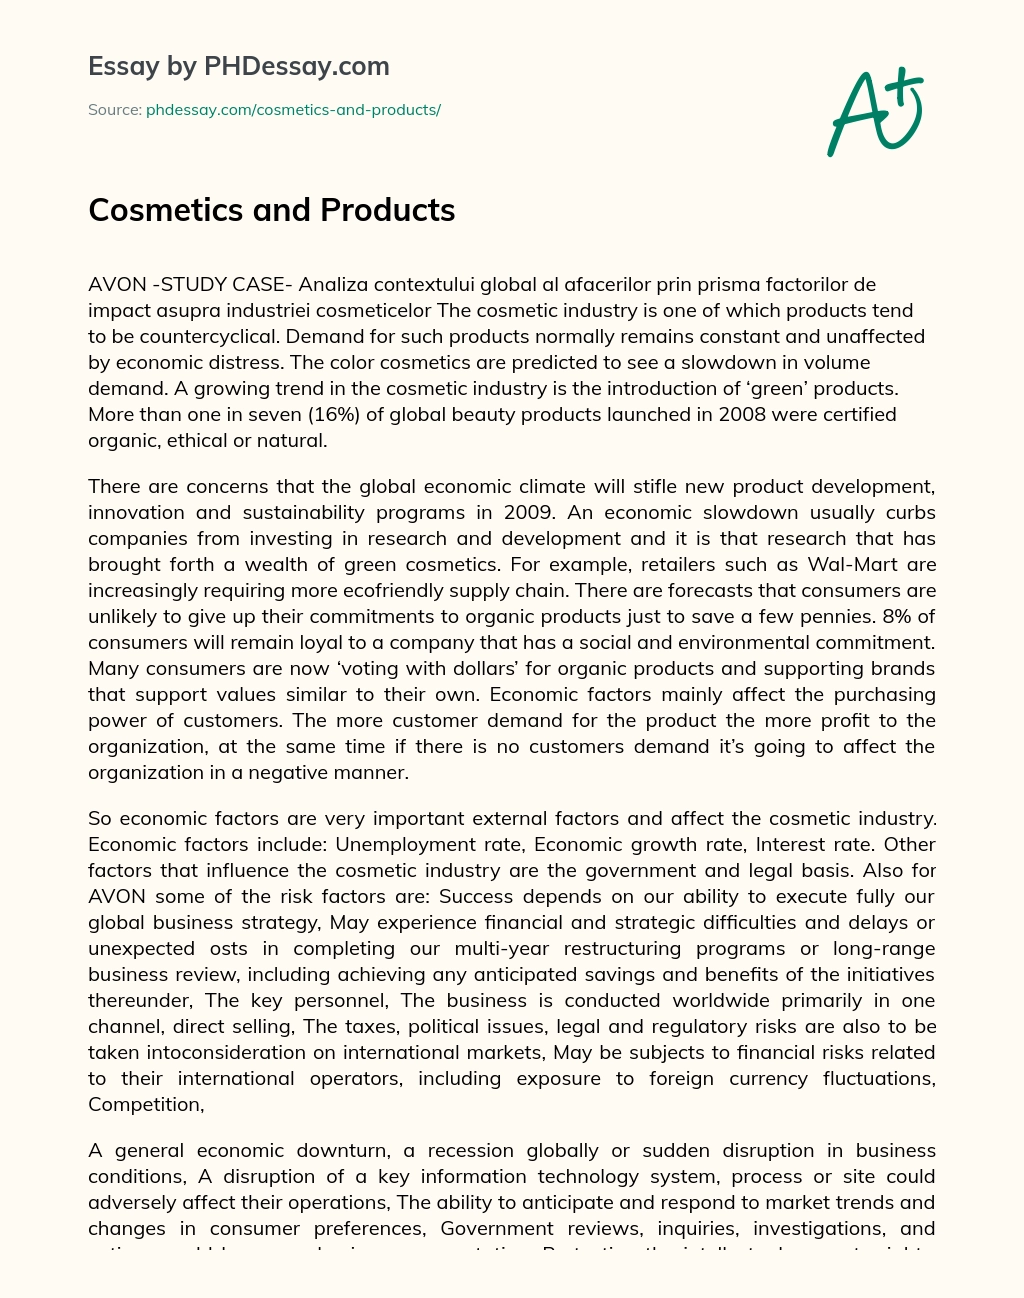 Cosmetics and Products essay